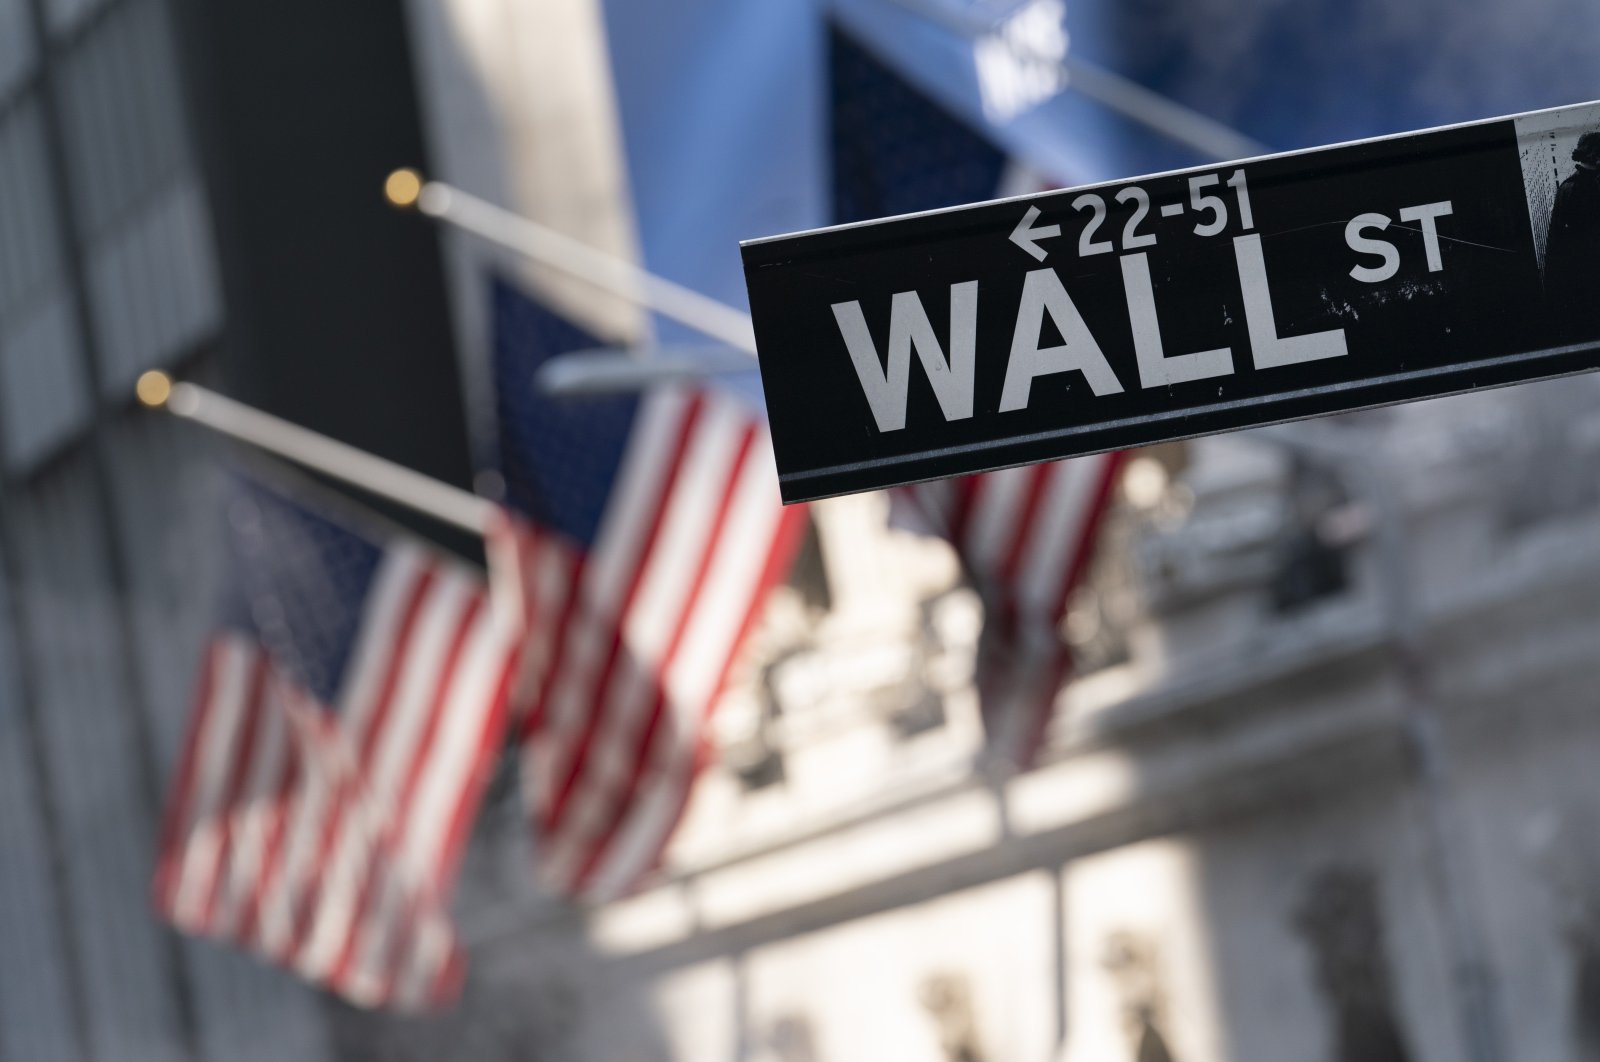 A sign for Wall Street hangs in front of the New York Stock Exchange, New York, U.S., July 8, 2021. (AP Photo)